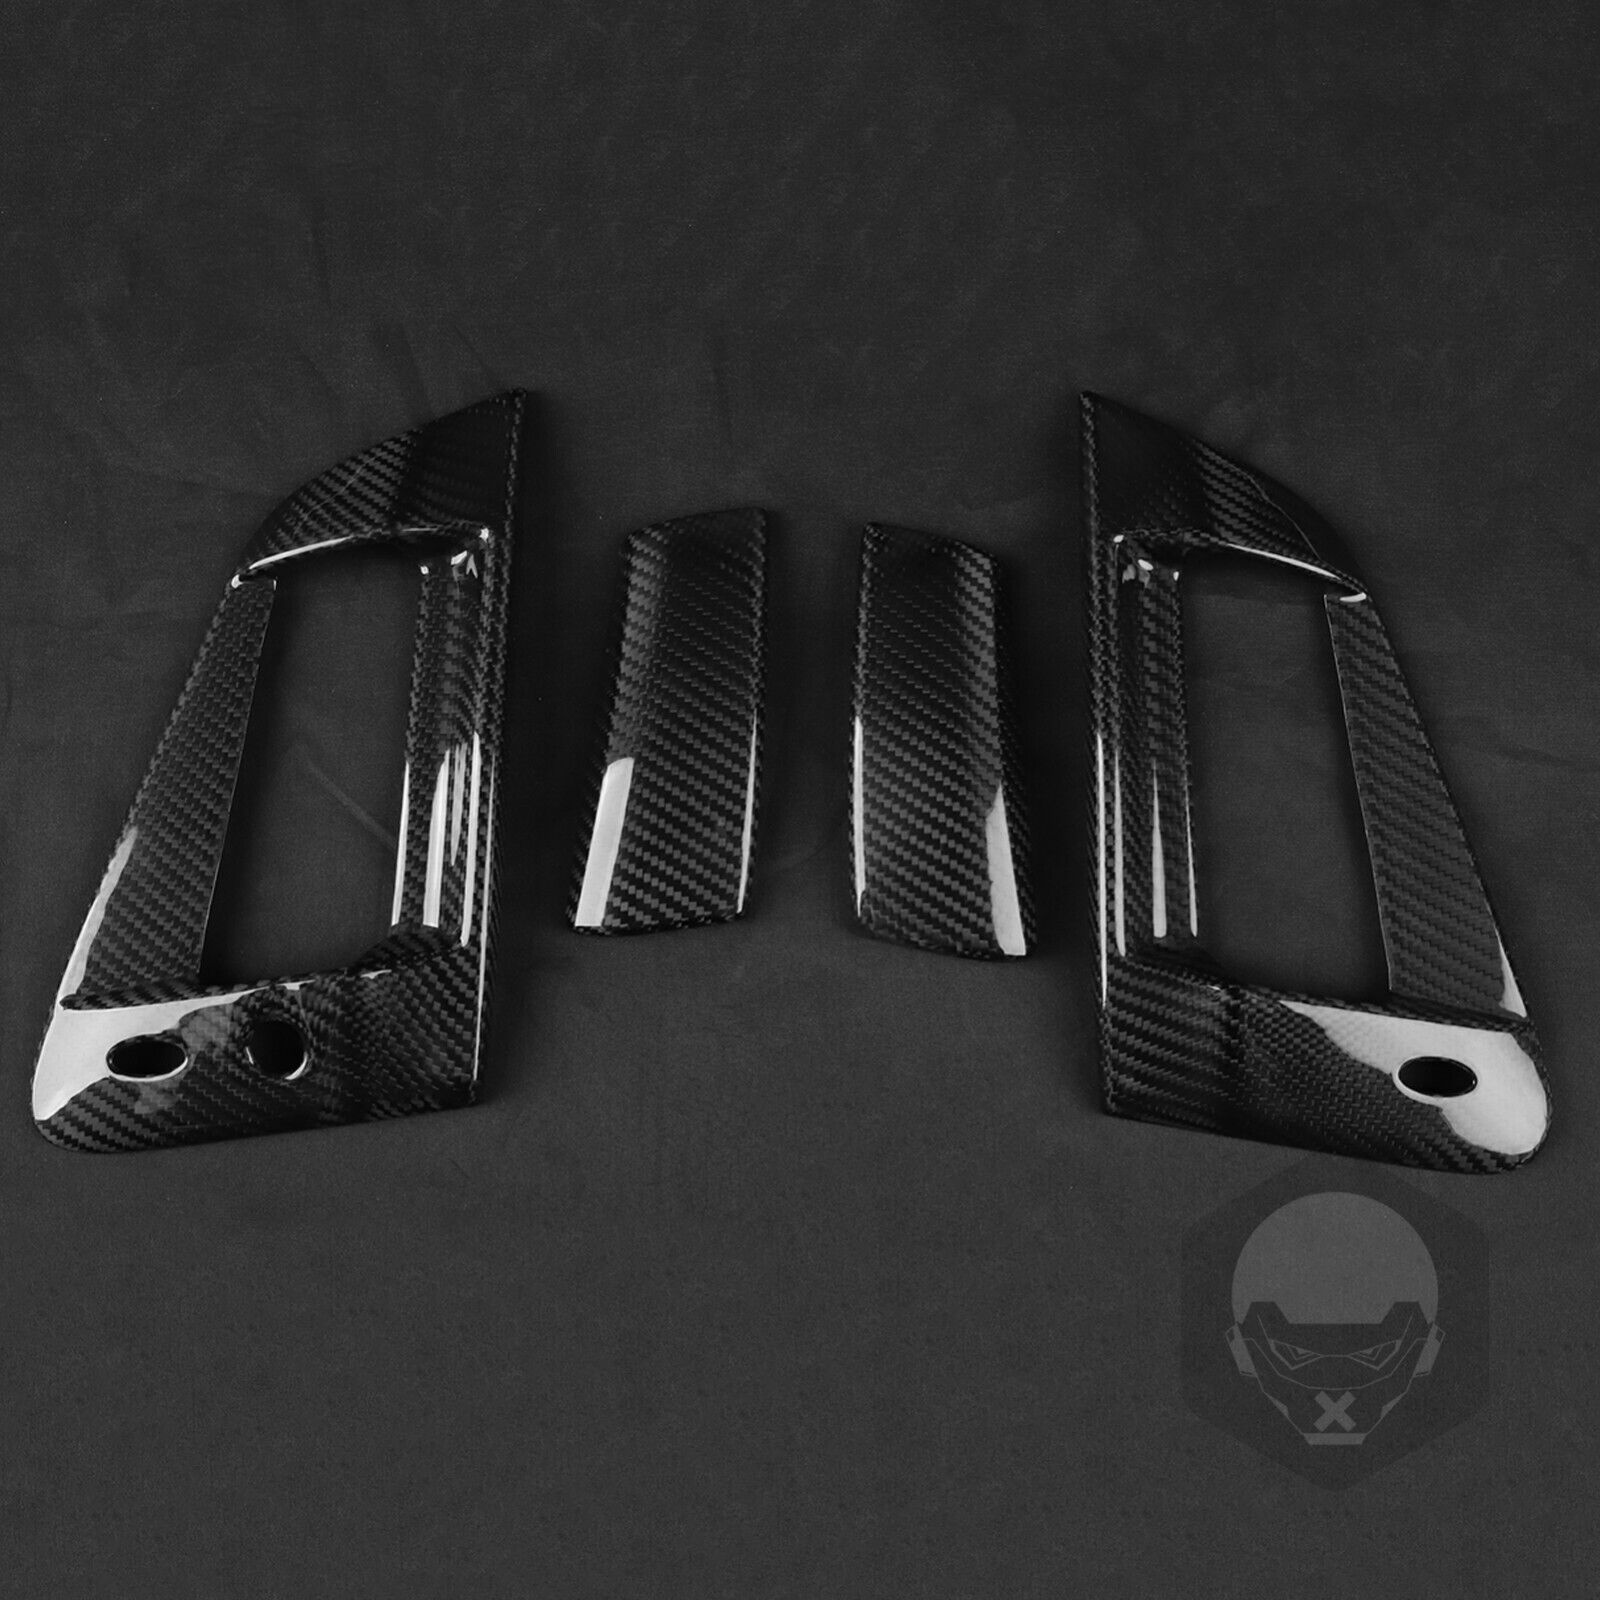 Real Dry Carbon Fiber Exterior Door Handle Cover For Nissan 370Z Z34 EVO-R 09-21